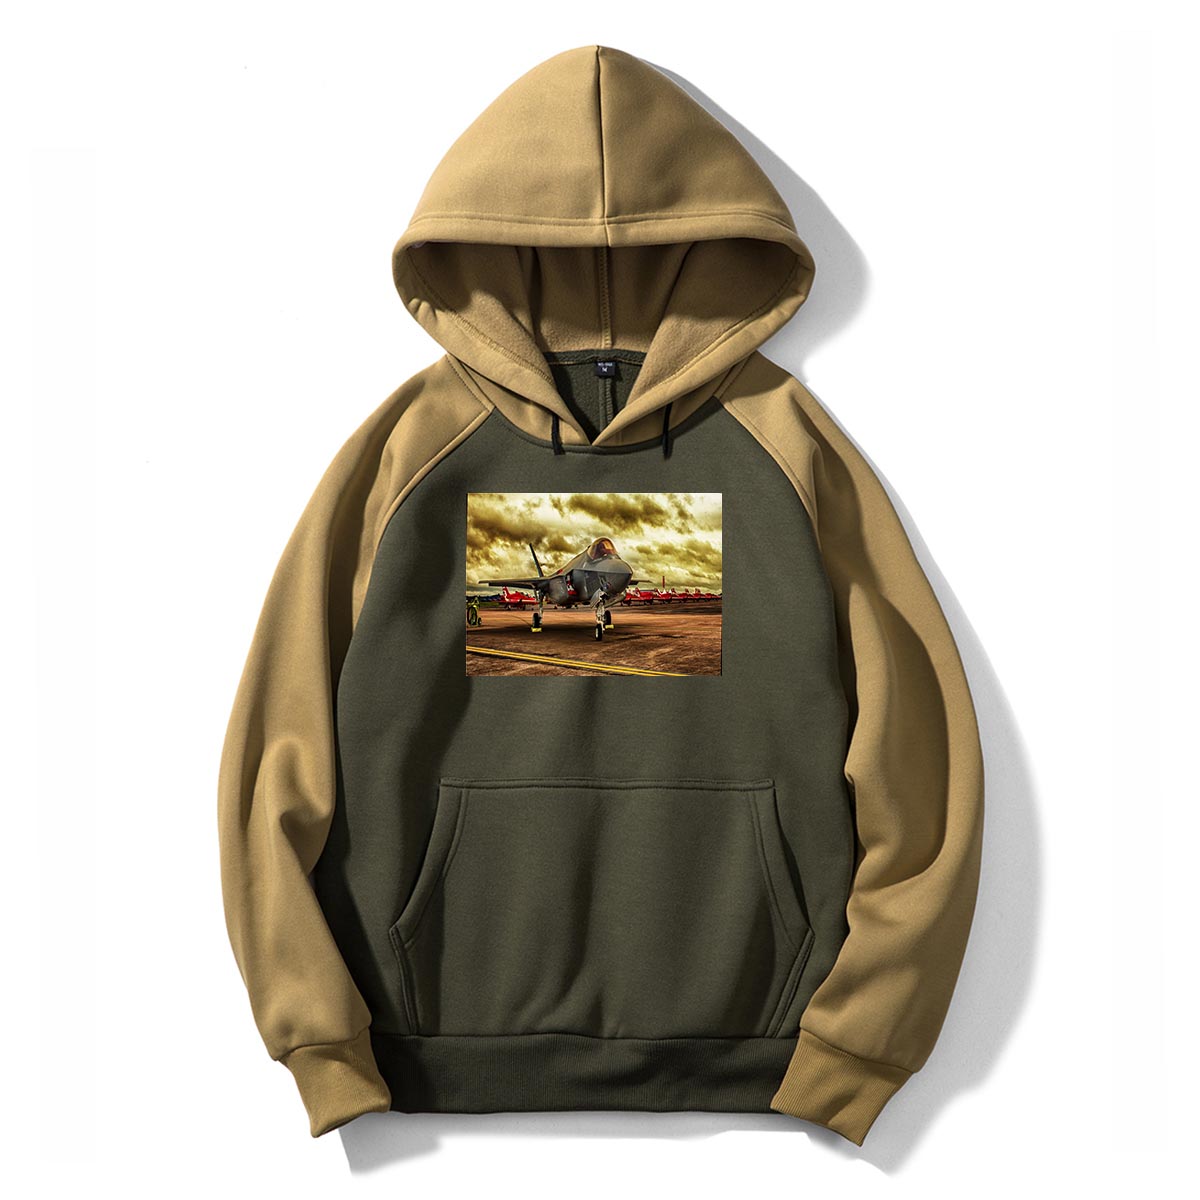 Fighting Falcon F35 at Airbase Designed Colourful Hoodies